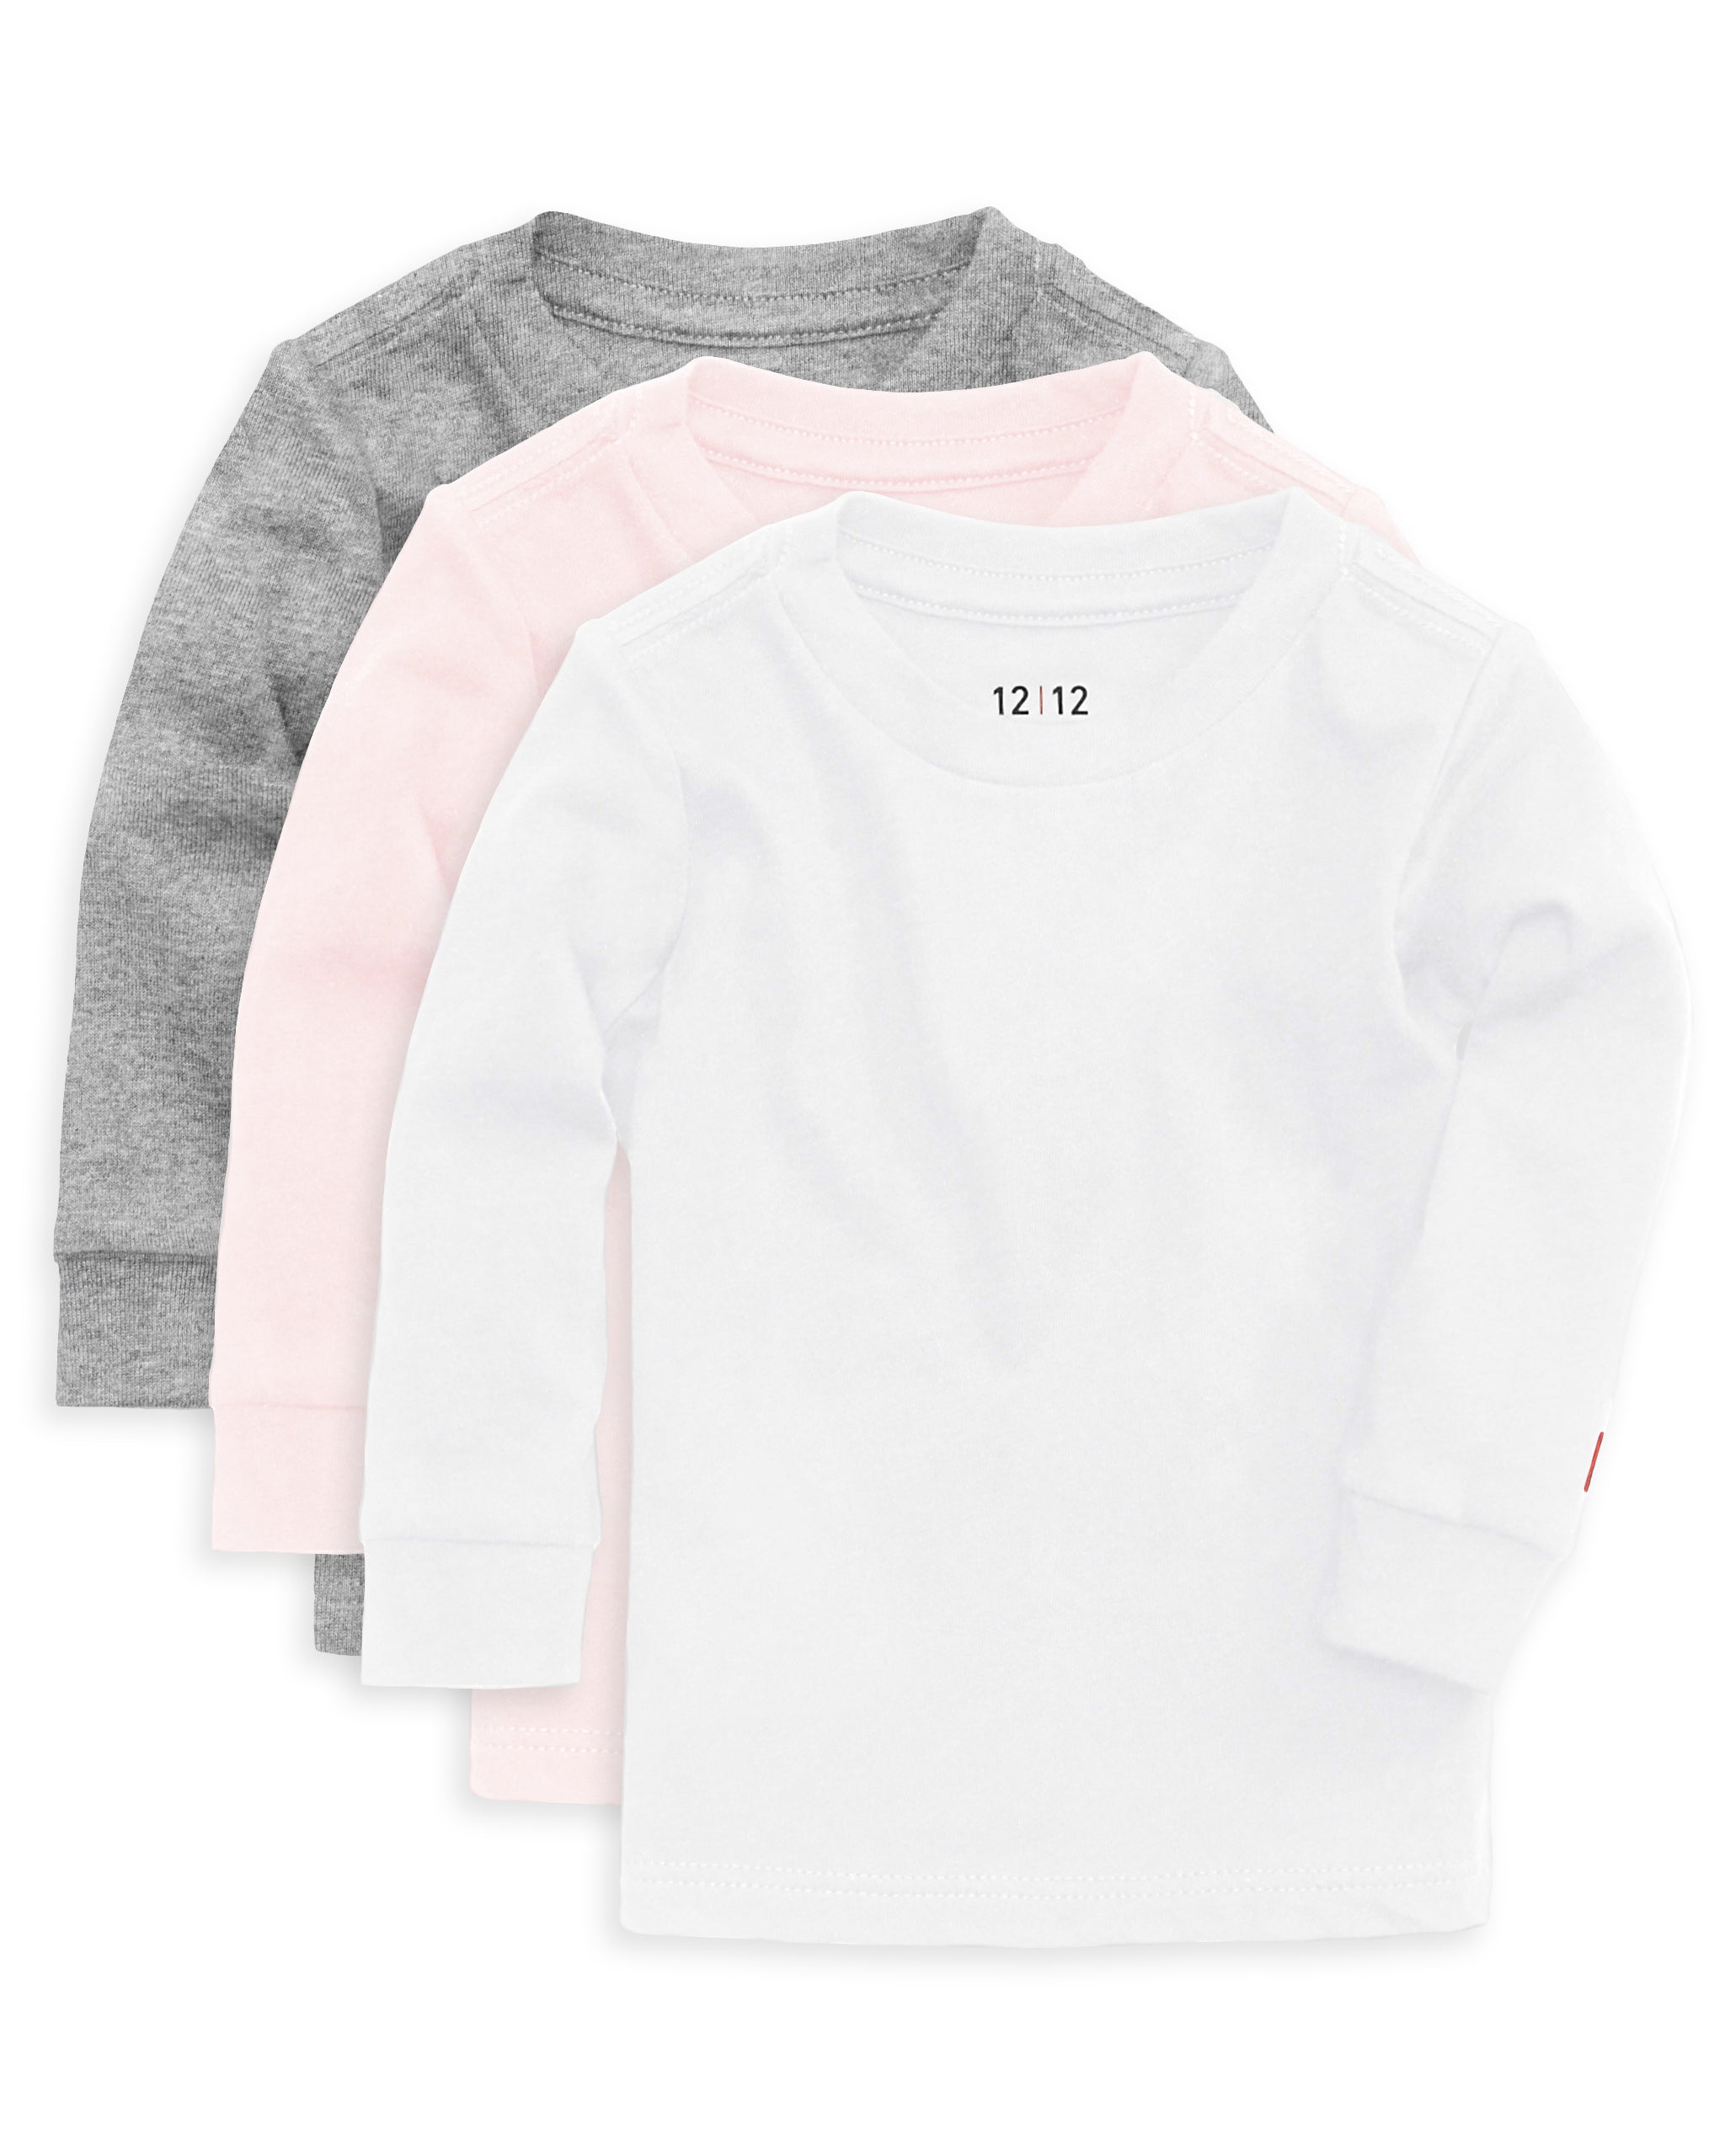 The Organic Long Sleeve Tee 3 Pack #color_Grey Pink White